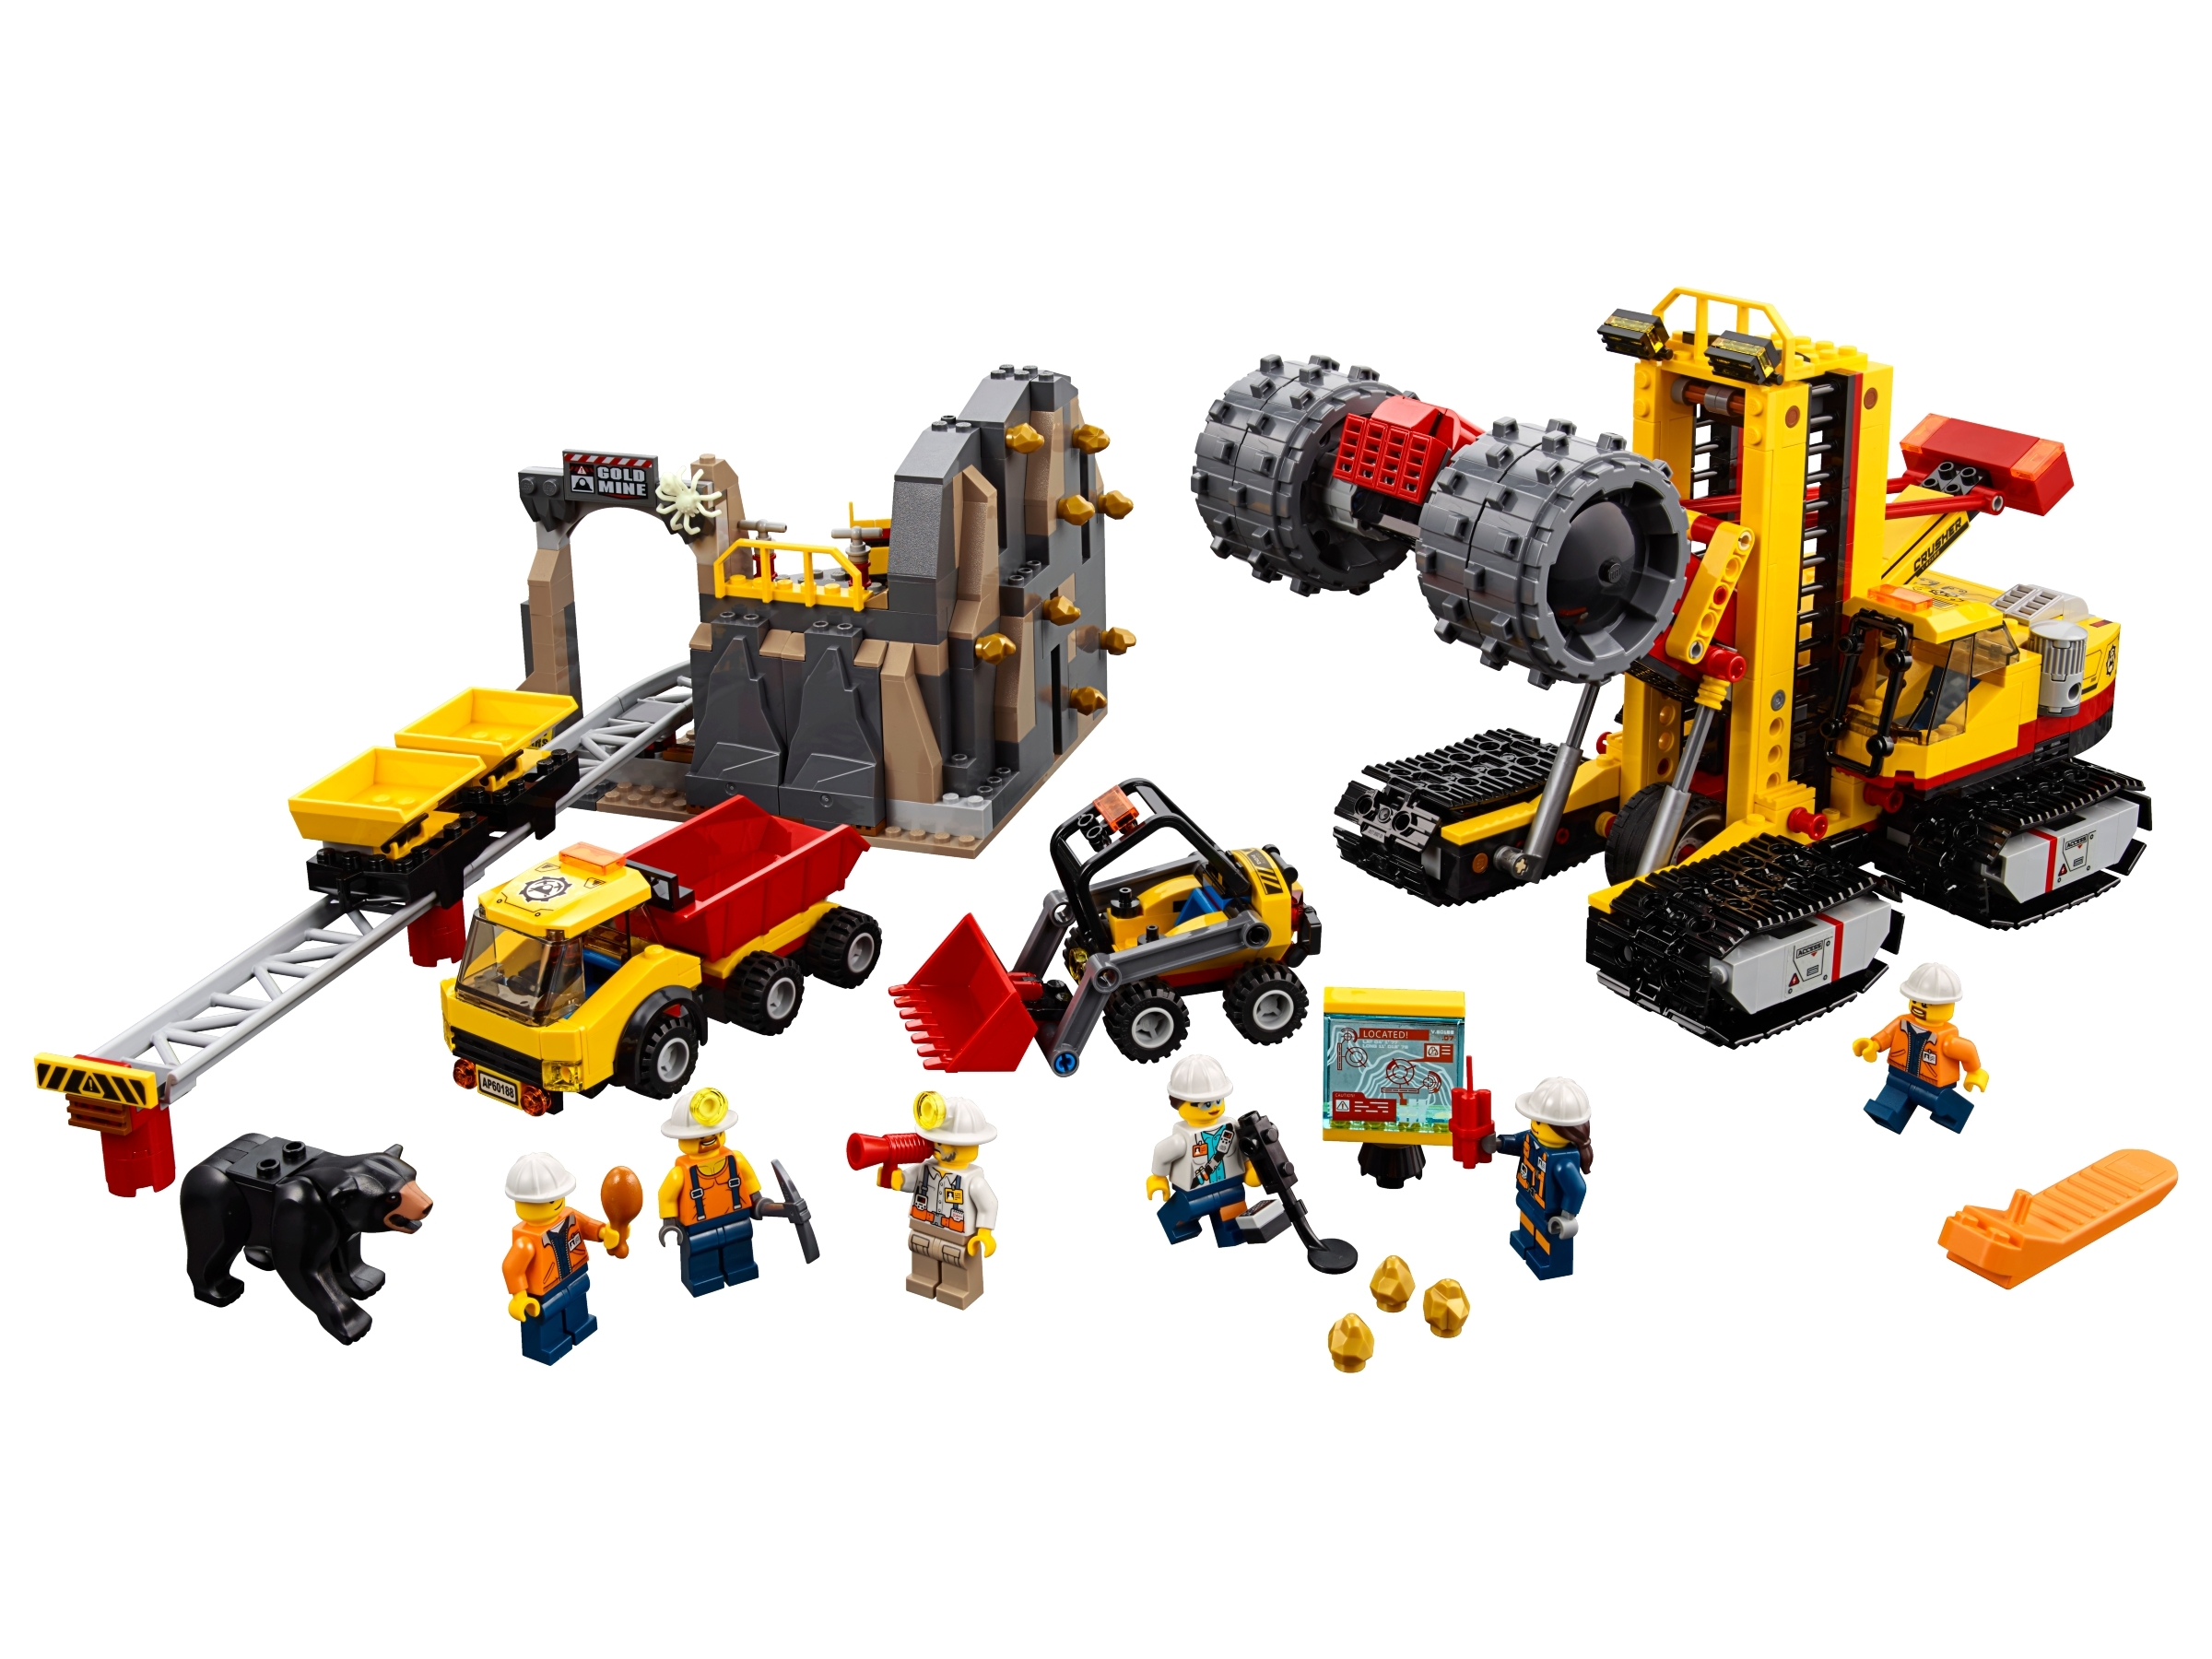 Mining Experts Site 60188 | City | Buy online at Official LEGO® Shop US